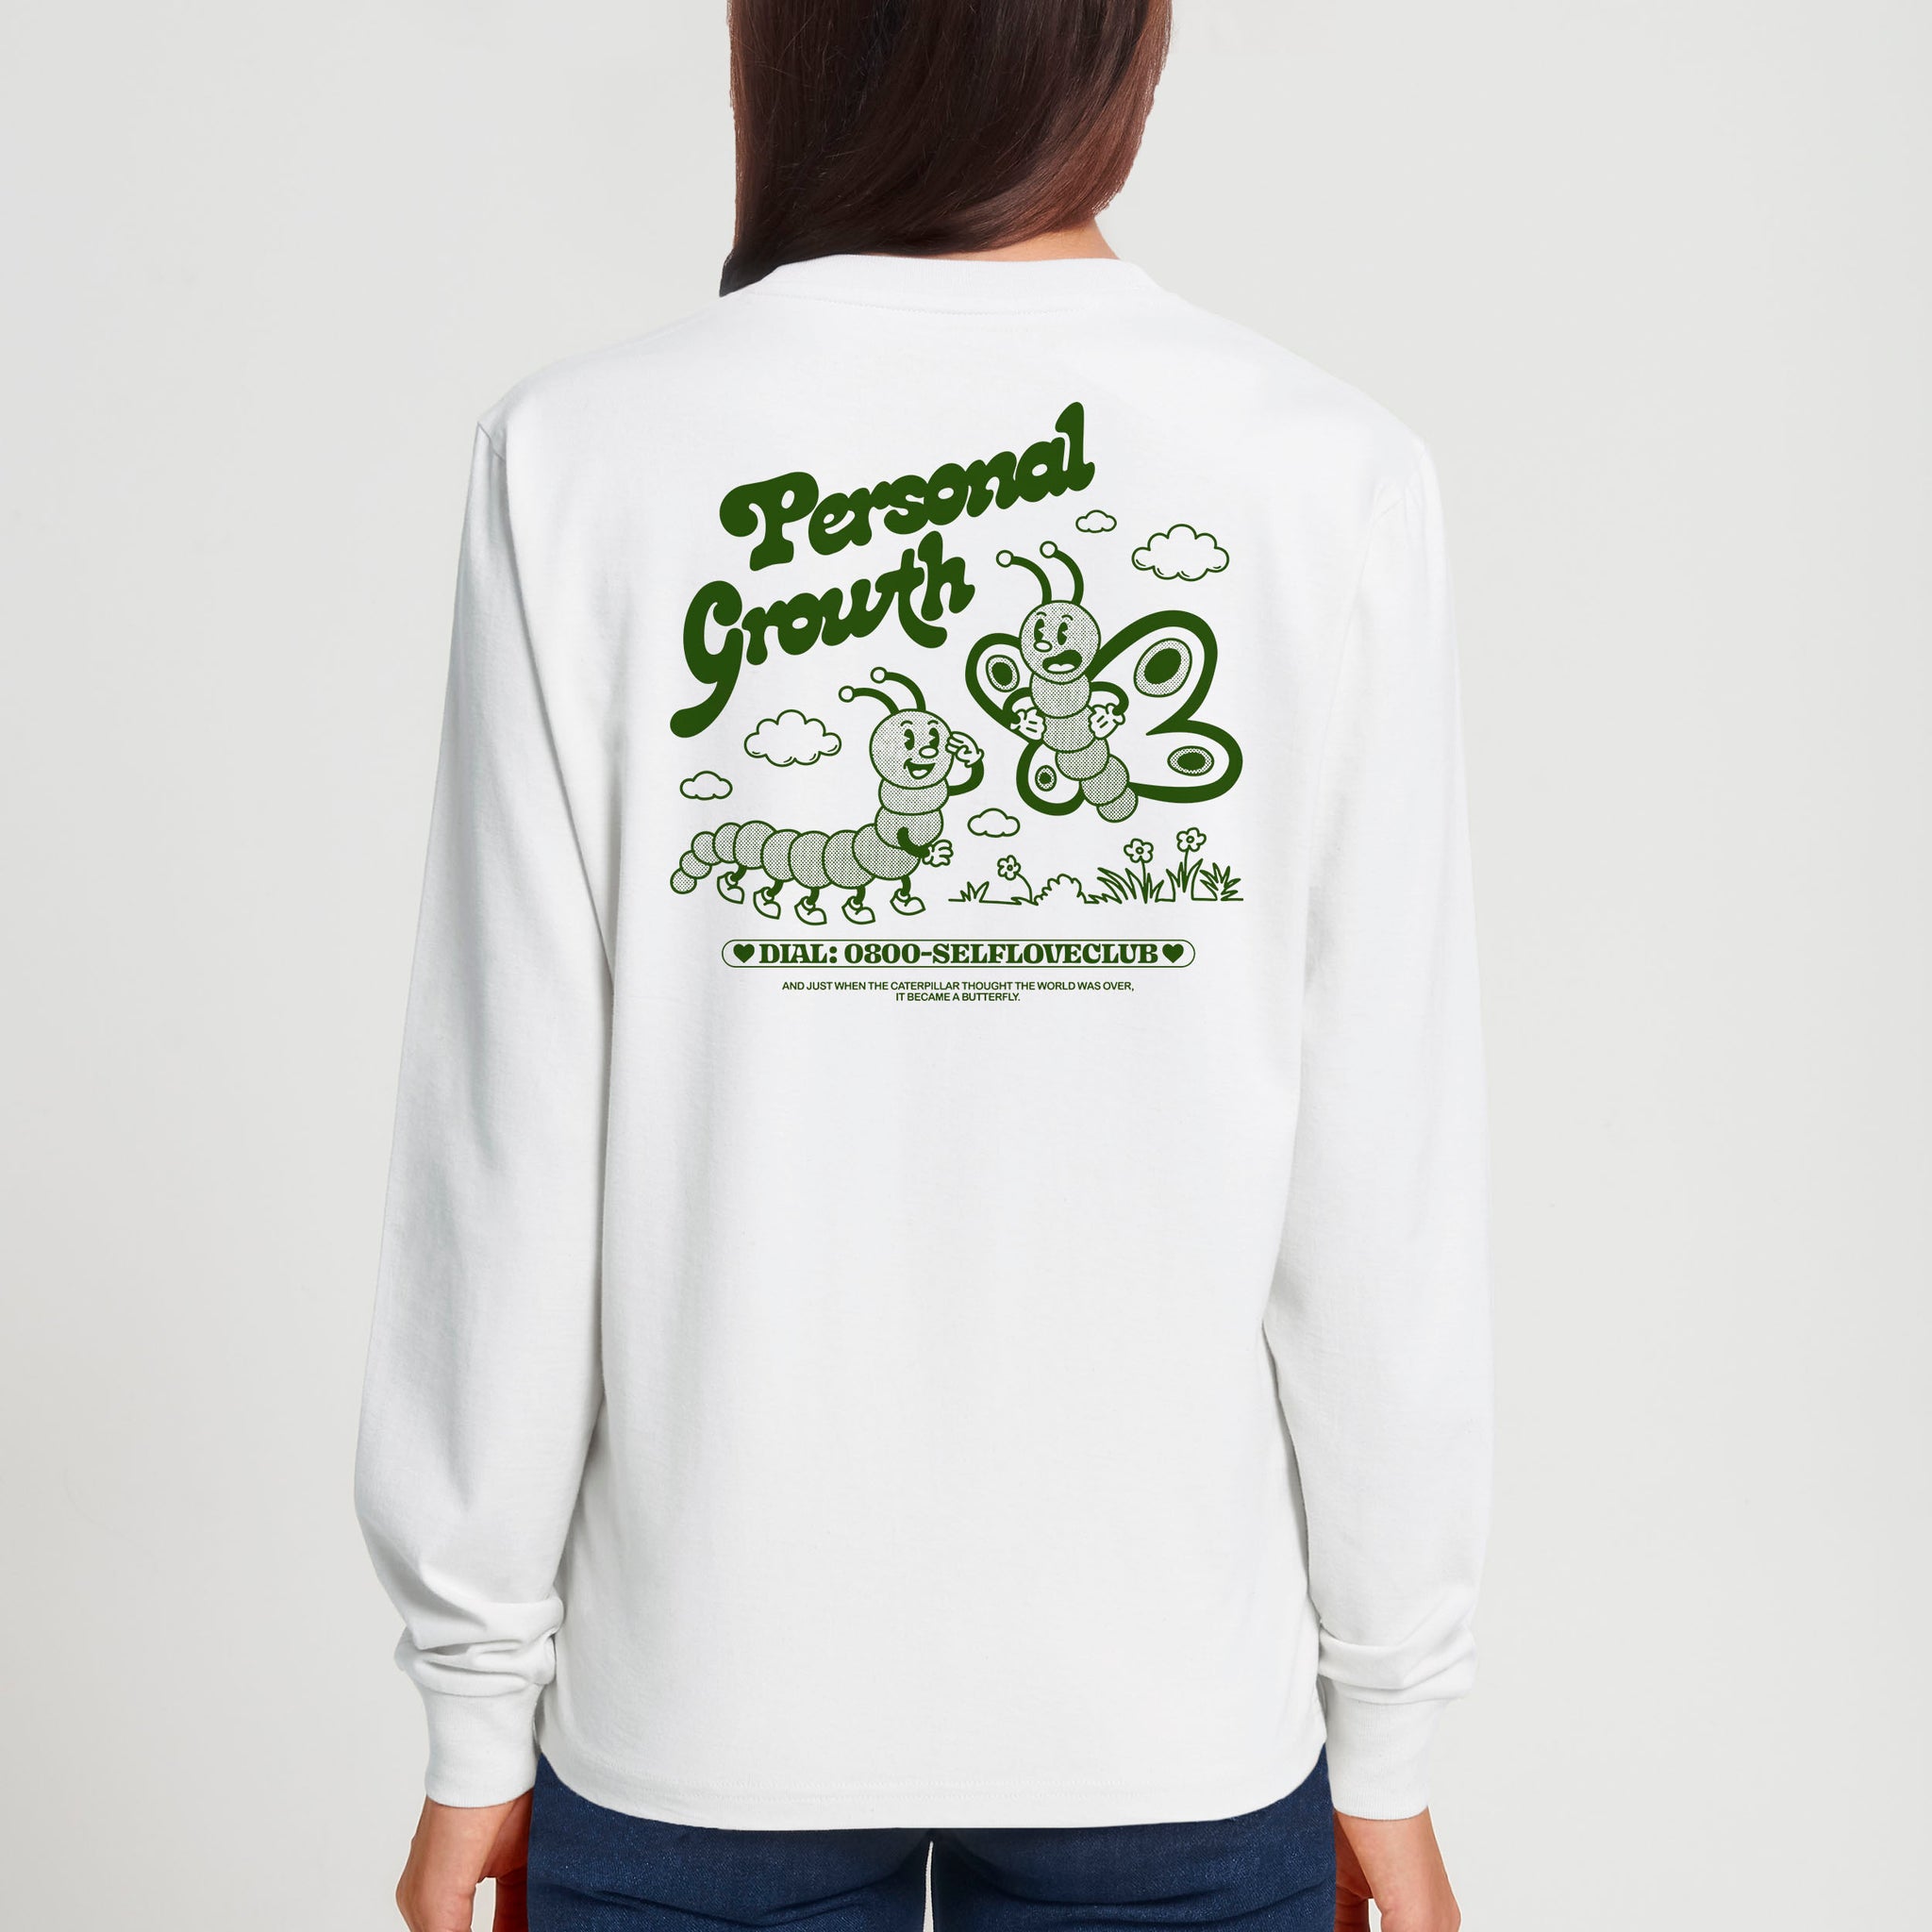 'Personal Growth' long sleeve T-shirt